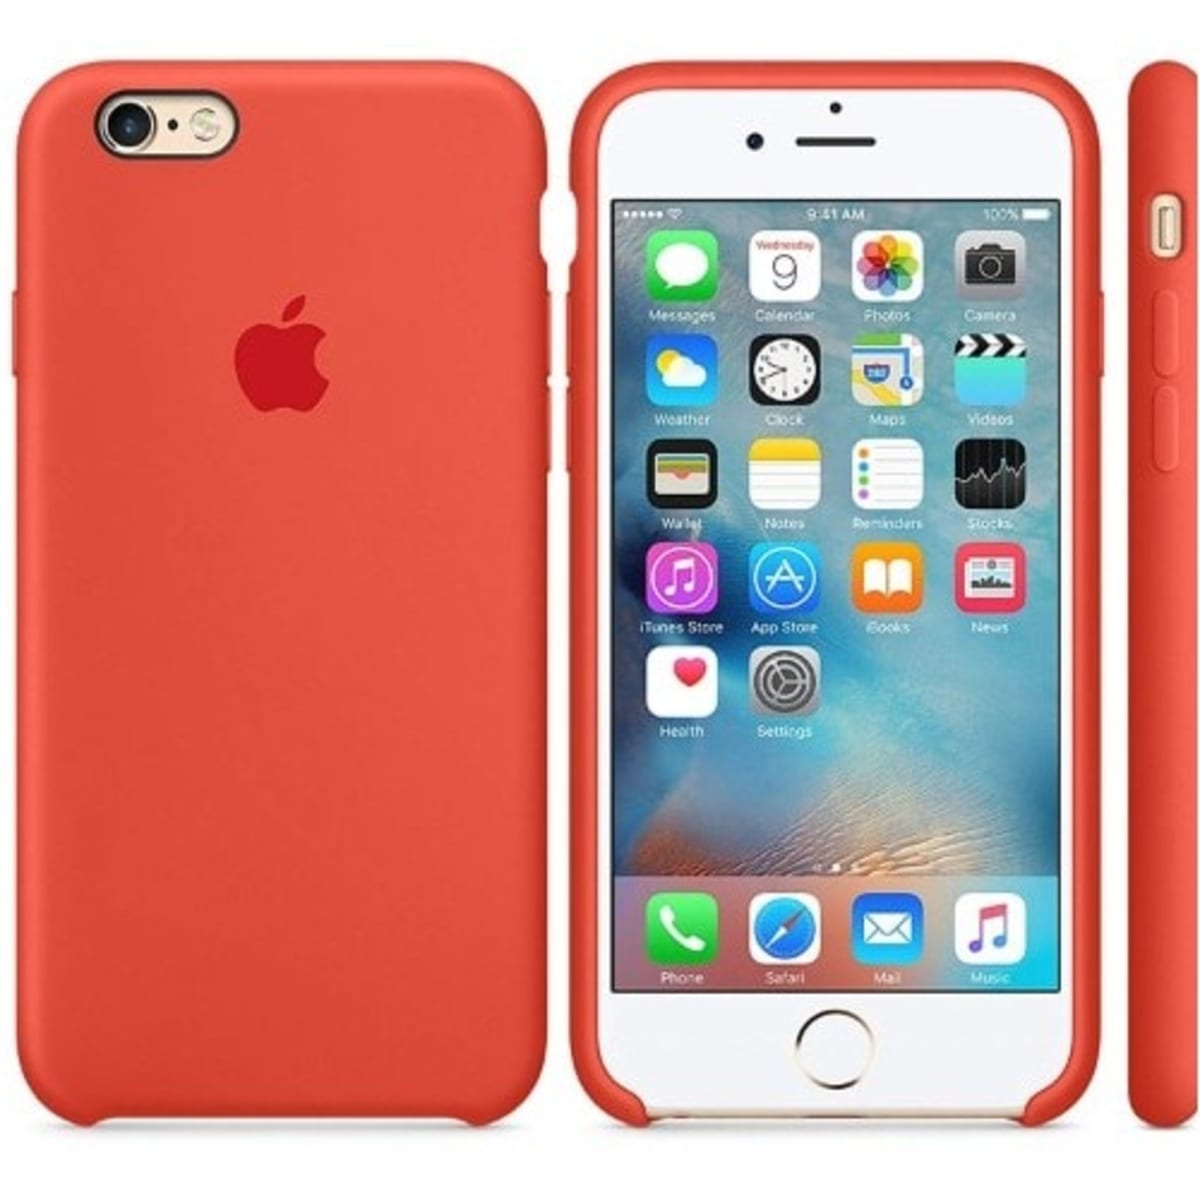 Apple iPhone 6 & 6 Plus Silicone Case Review — Gadgetmac